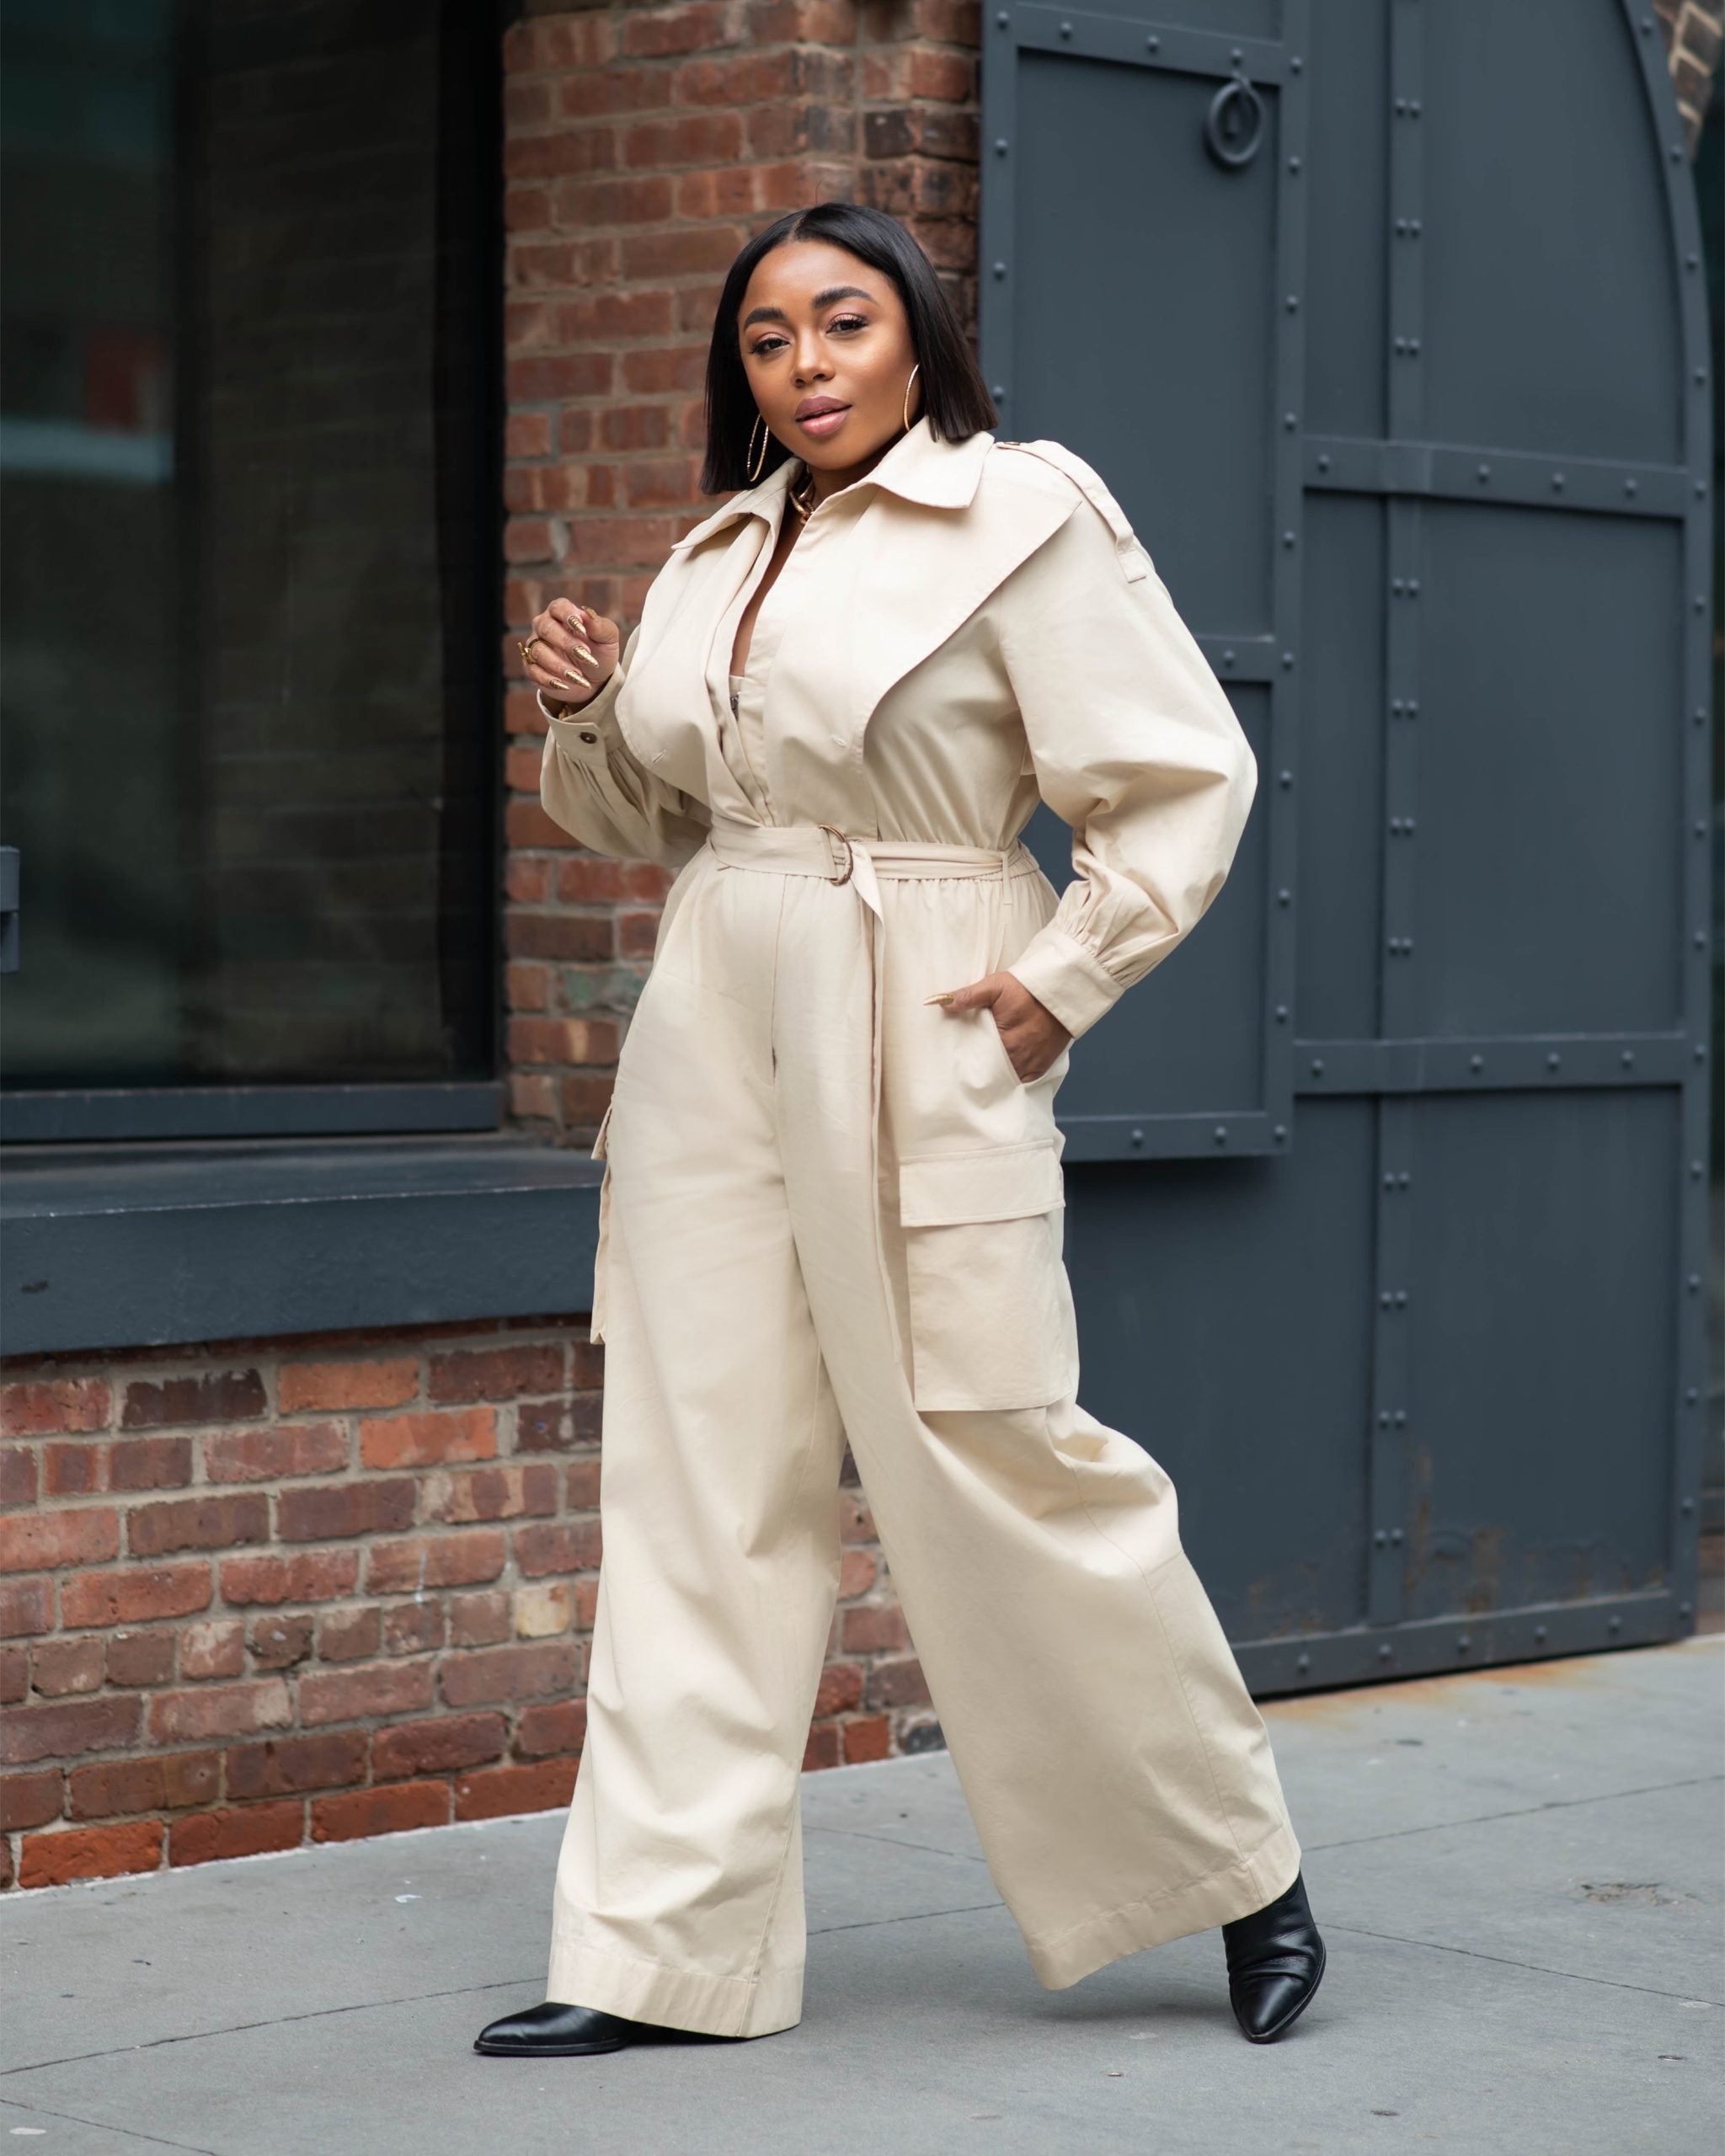 Lifestyle Influencer Kéla Walker Tapped For The Drop Collection With Amazon